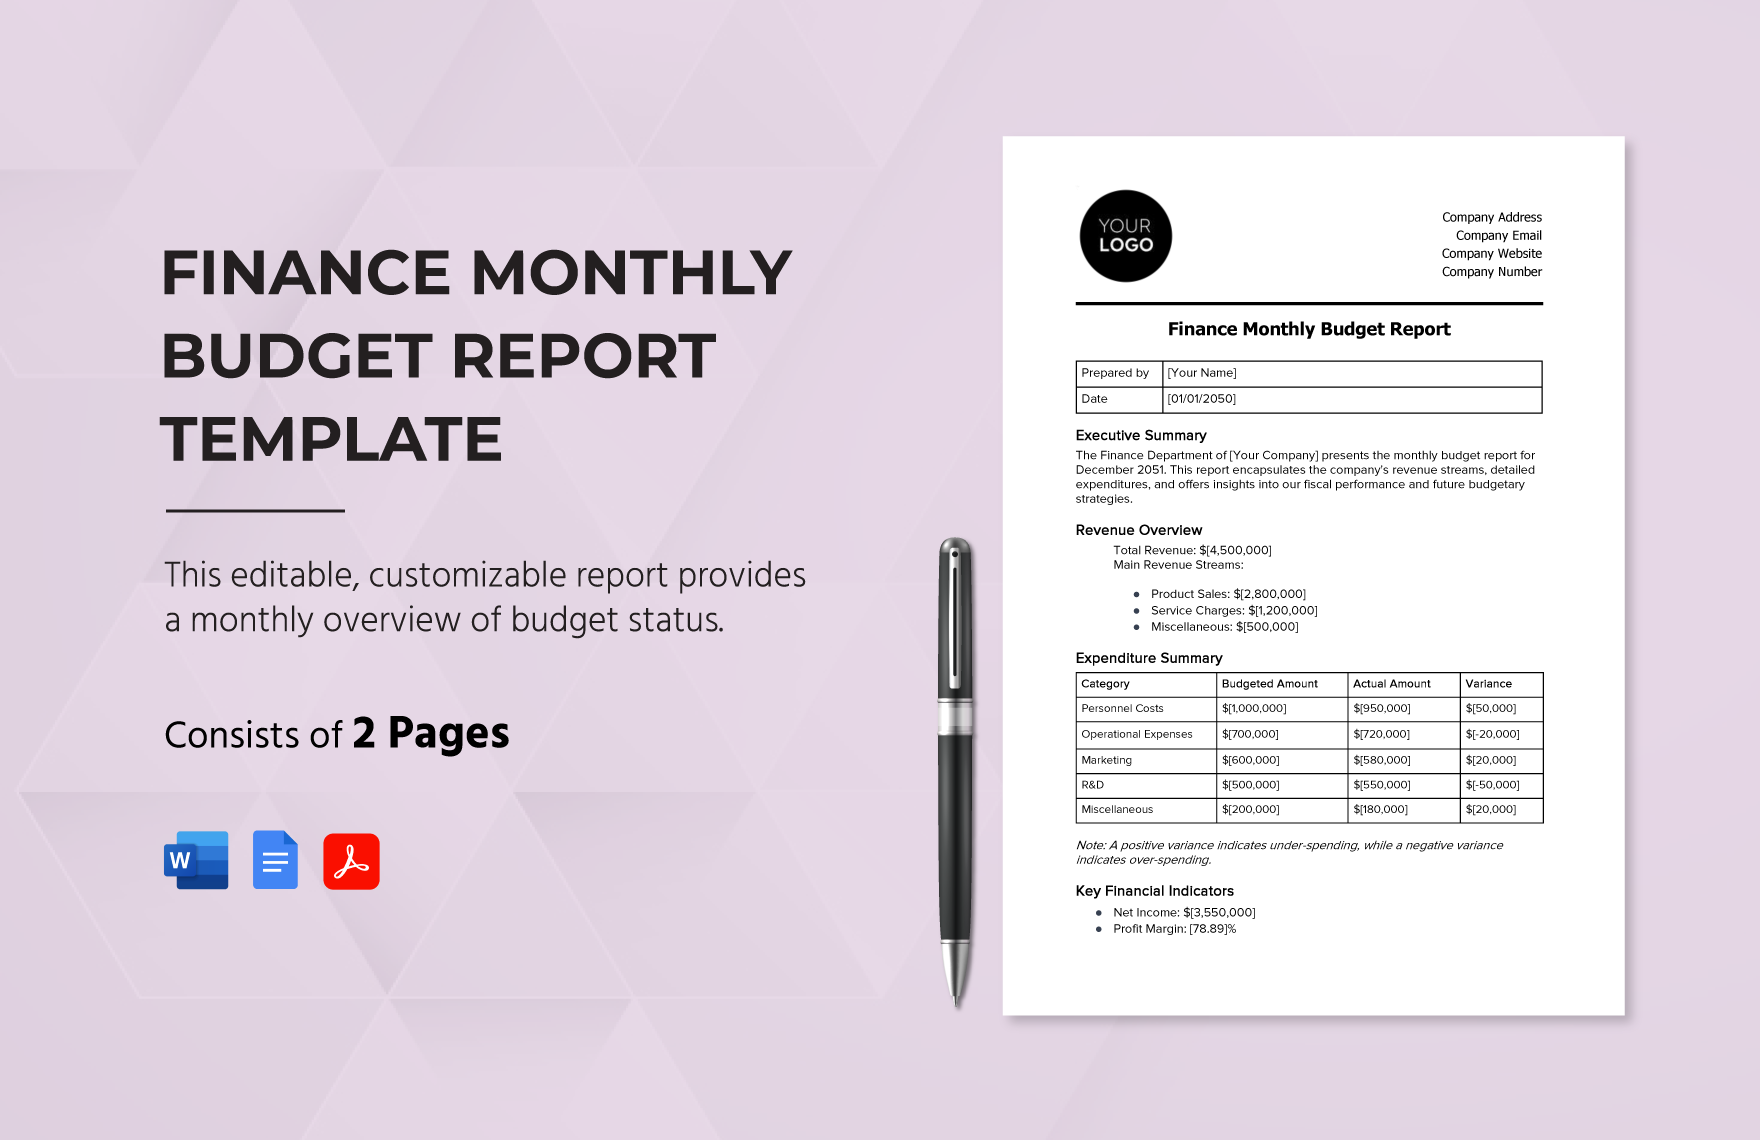 Finance Monthly Budget Report Template